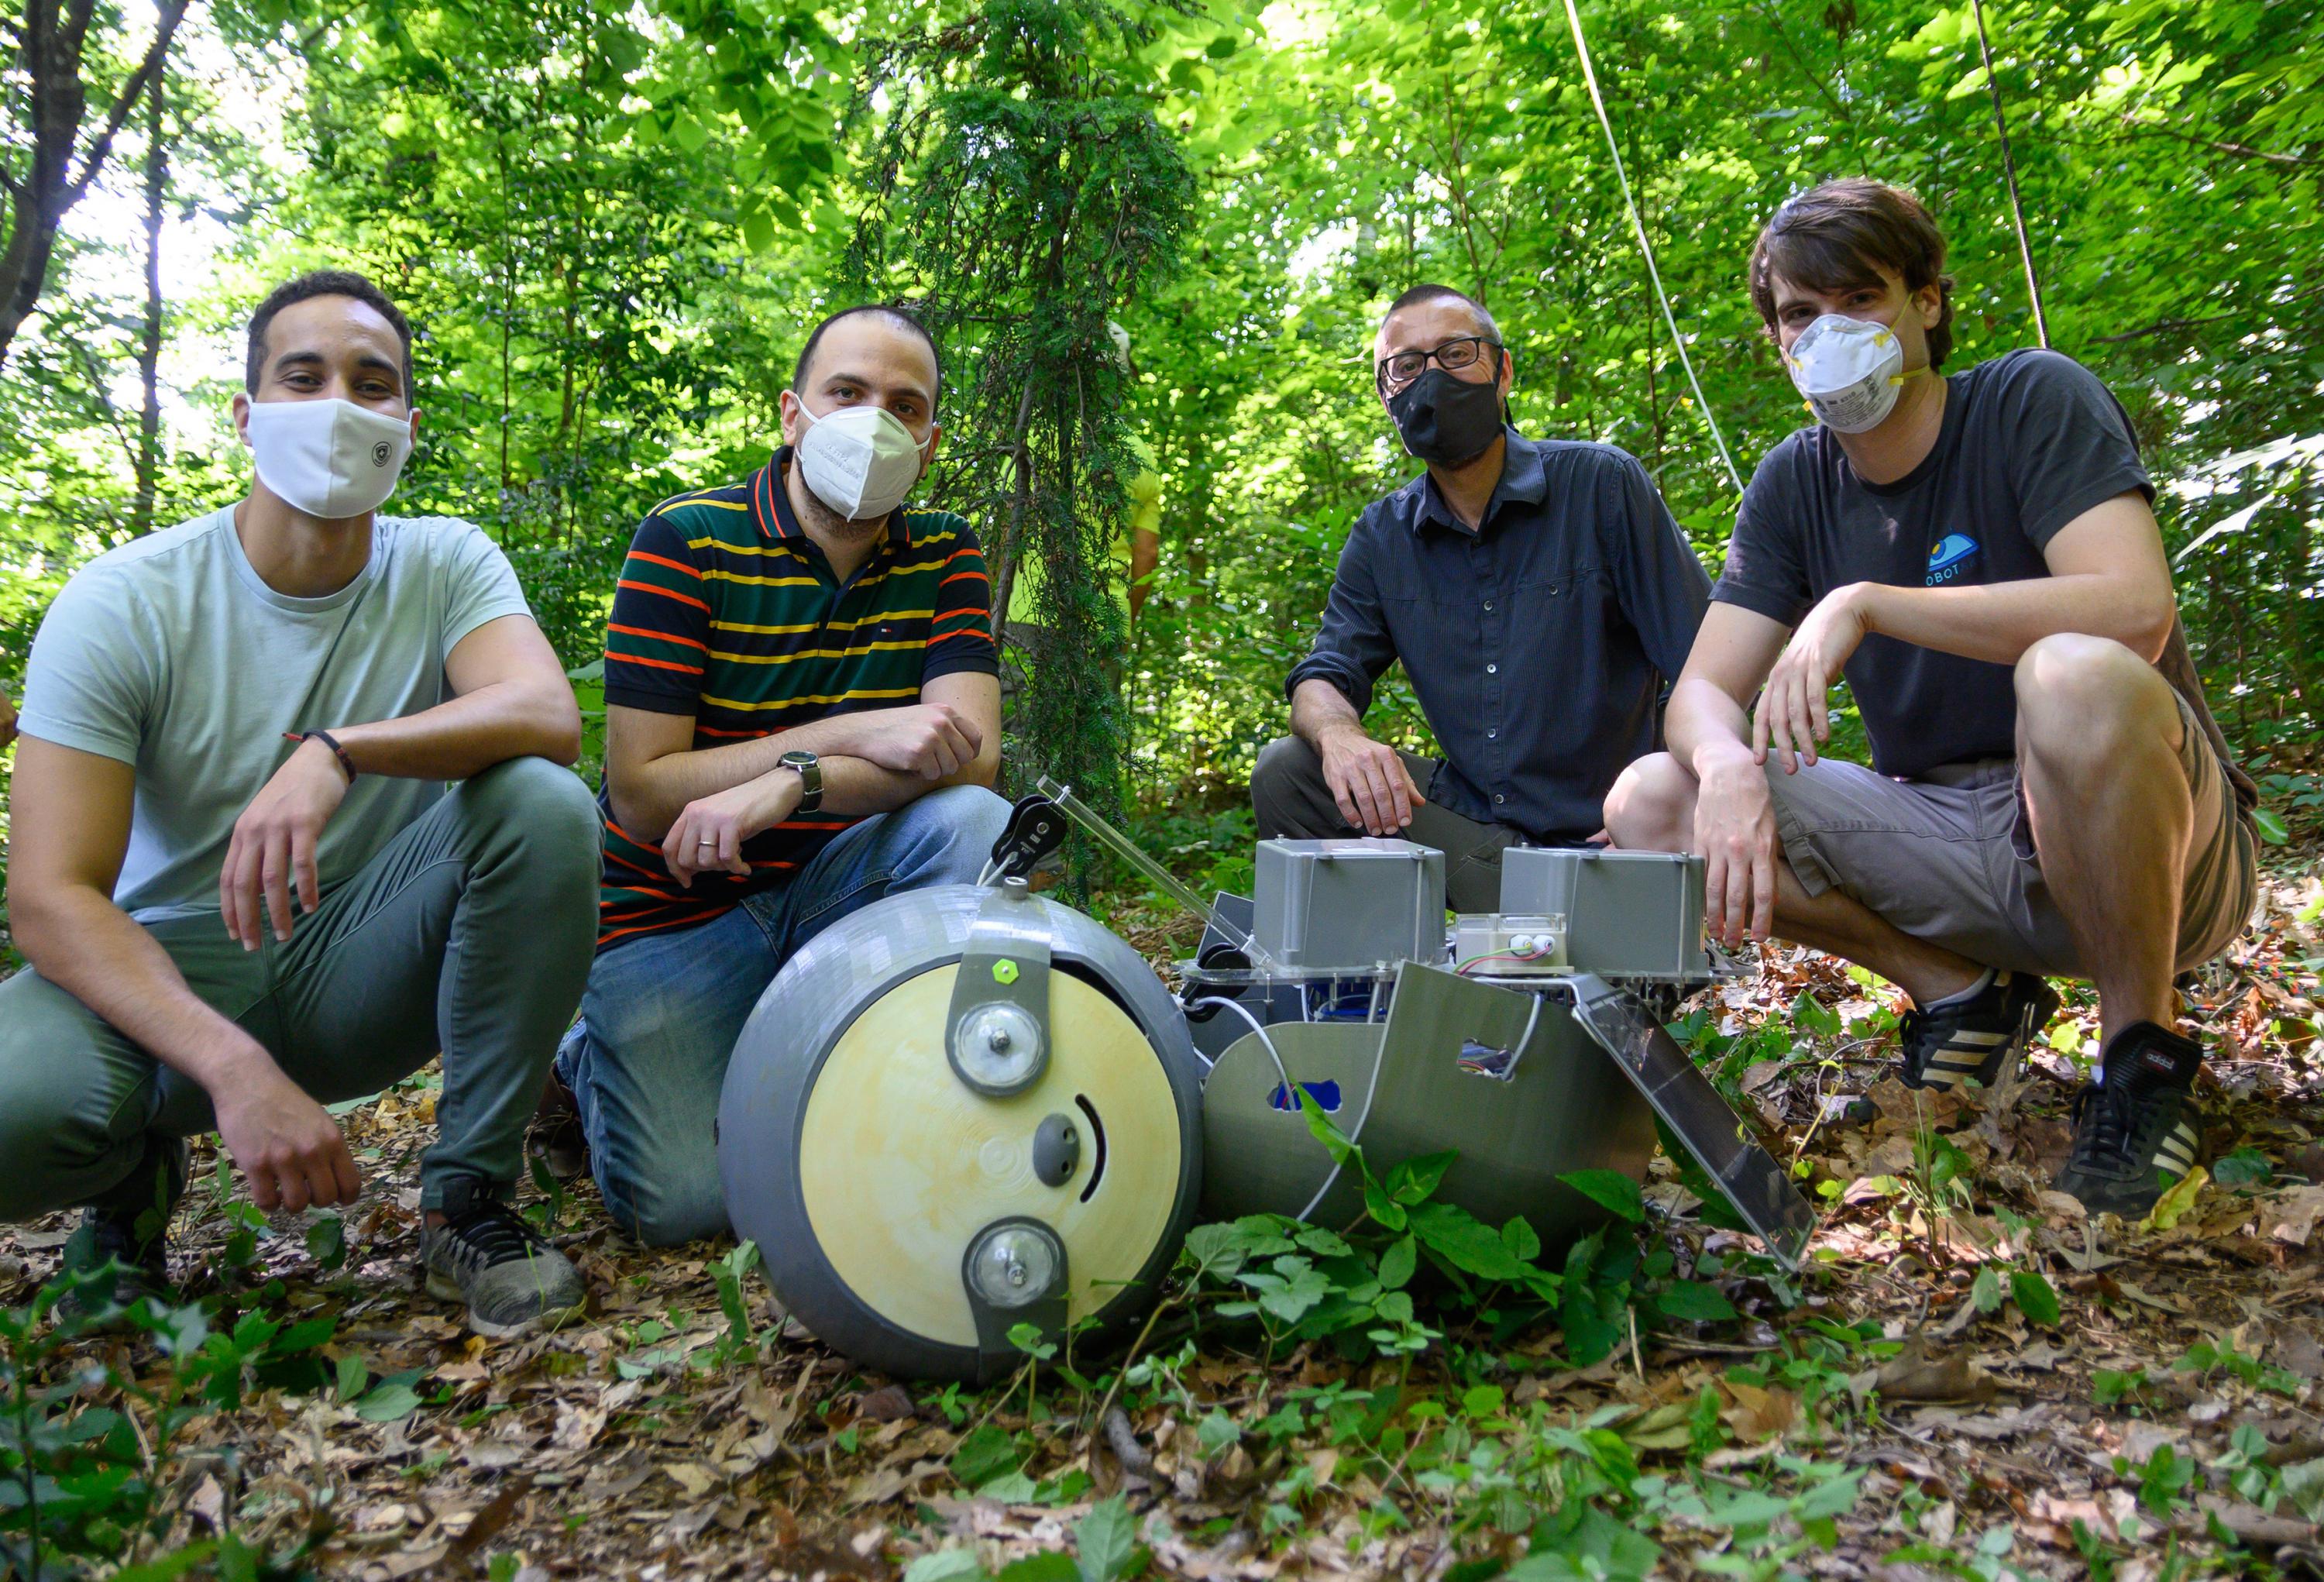 Georgia Tech researchers prepare to install the SlothBot at the Atlanta Botanical Garden. Shown are graduate research assistants Yousef Emam and Gennaro Notomista, Professor and School Chair Magnus Egerstedt, and Research Engineer Sean Wilson. (Credit: Rob Felt, Georgia Tech)